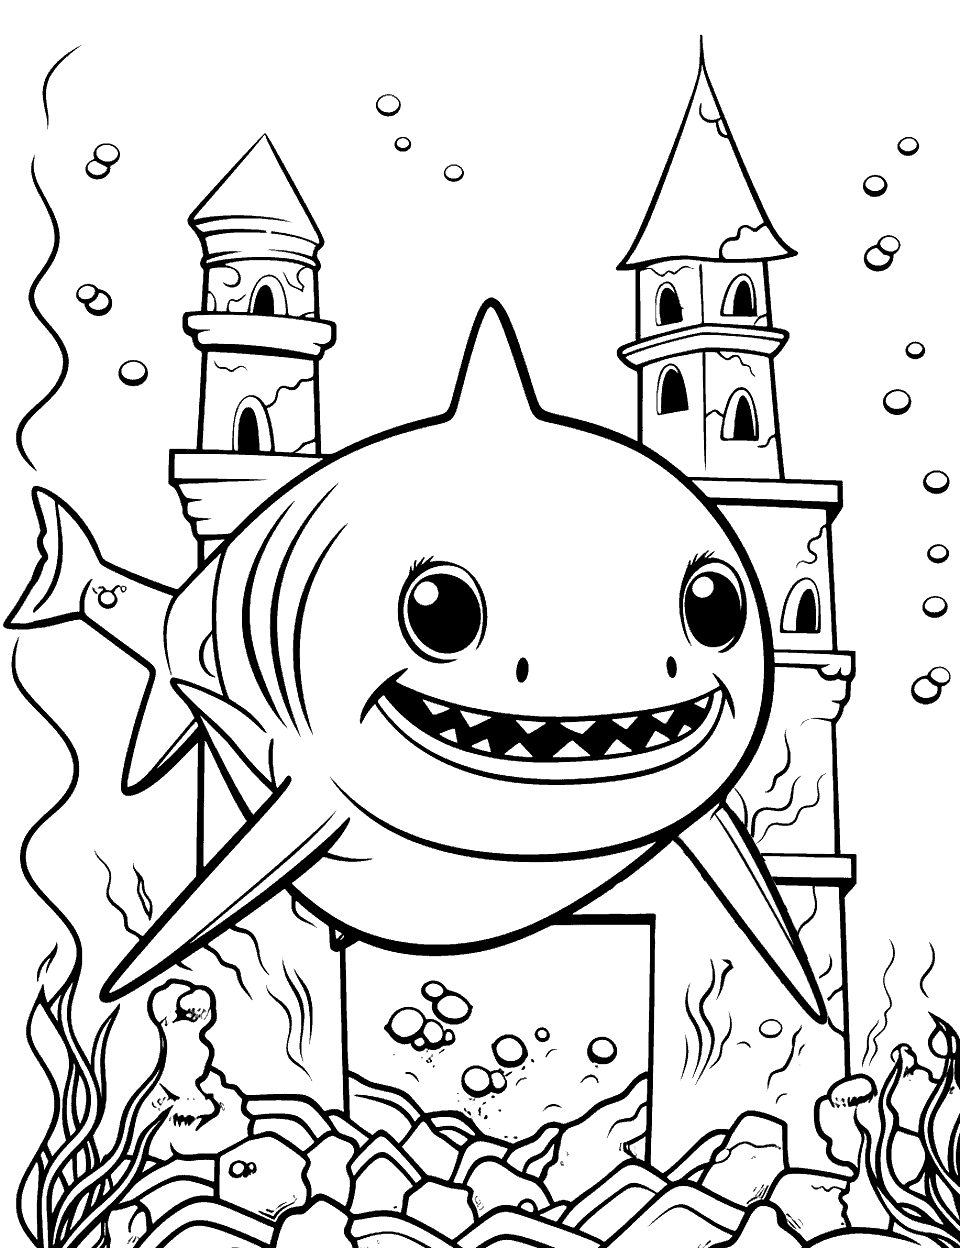 Ruin Adventure for Baby Shark Coloring Page - Baby Shark exploring the ruins underwater.